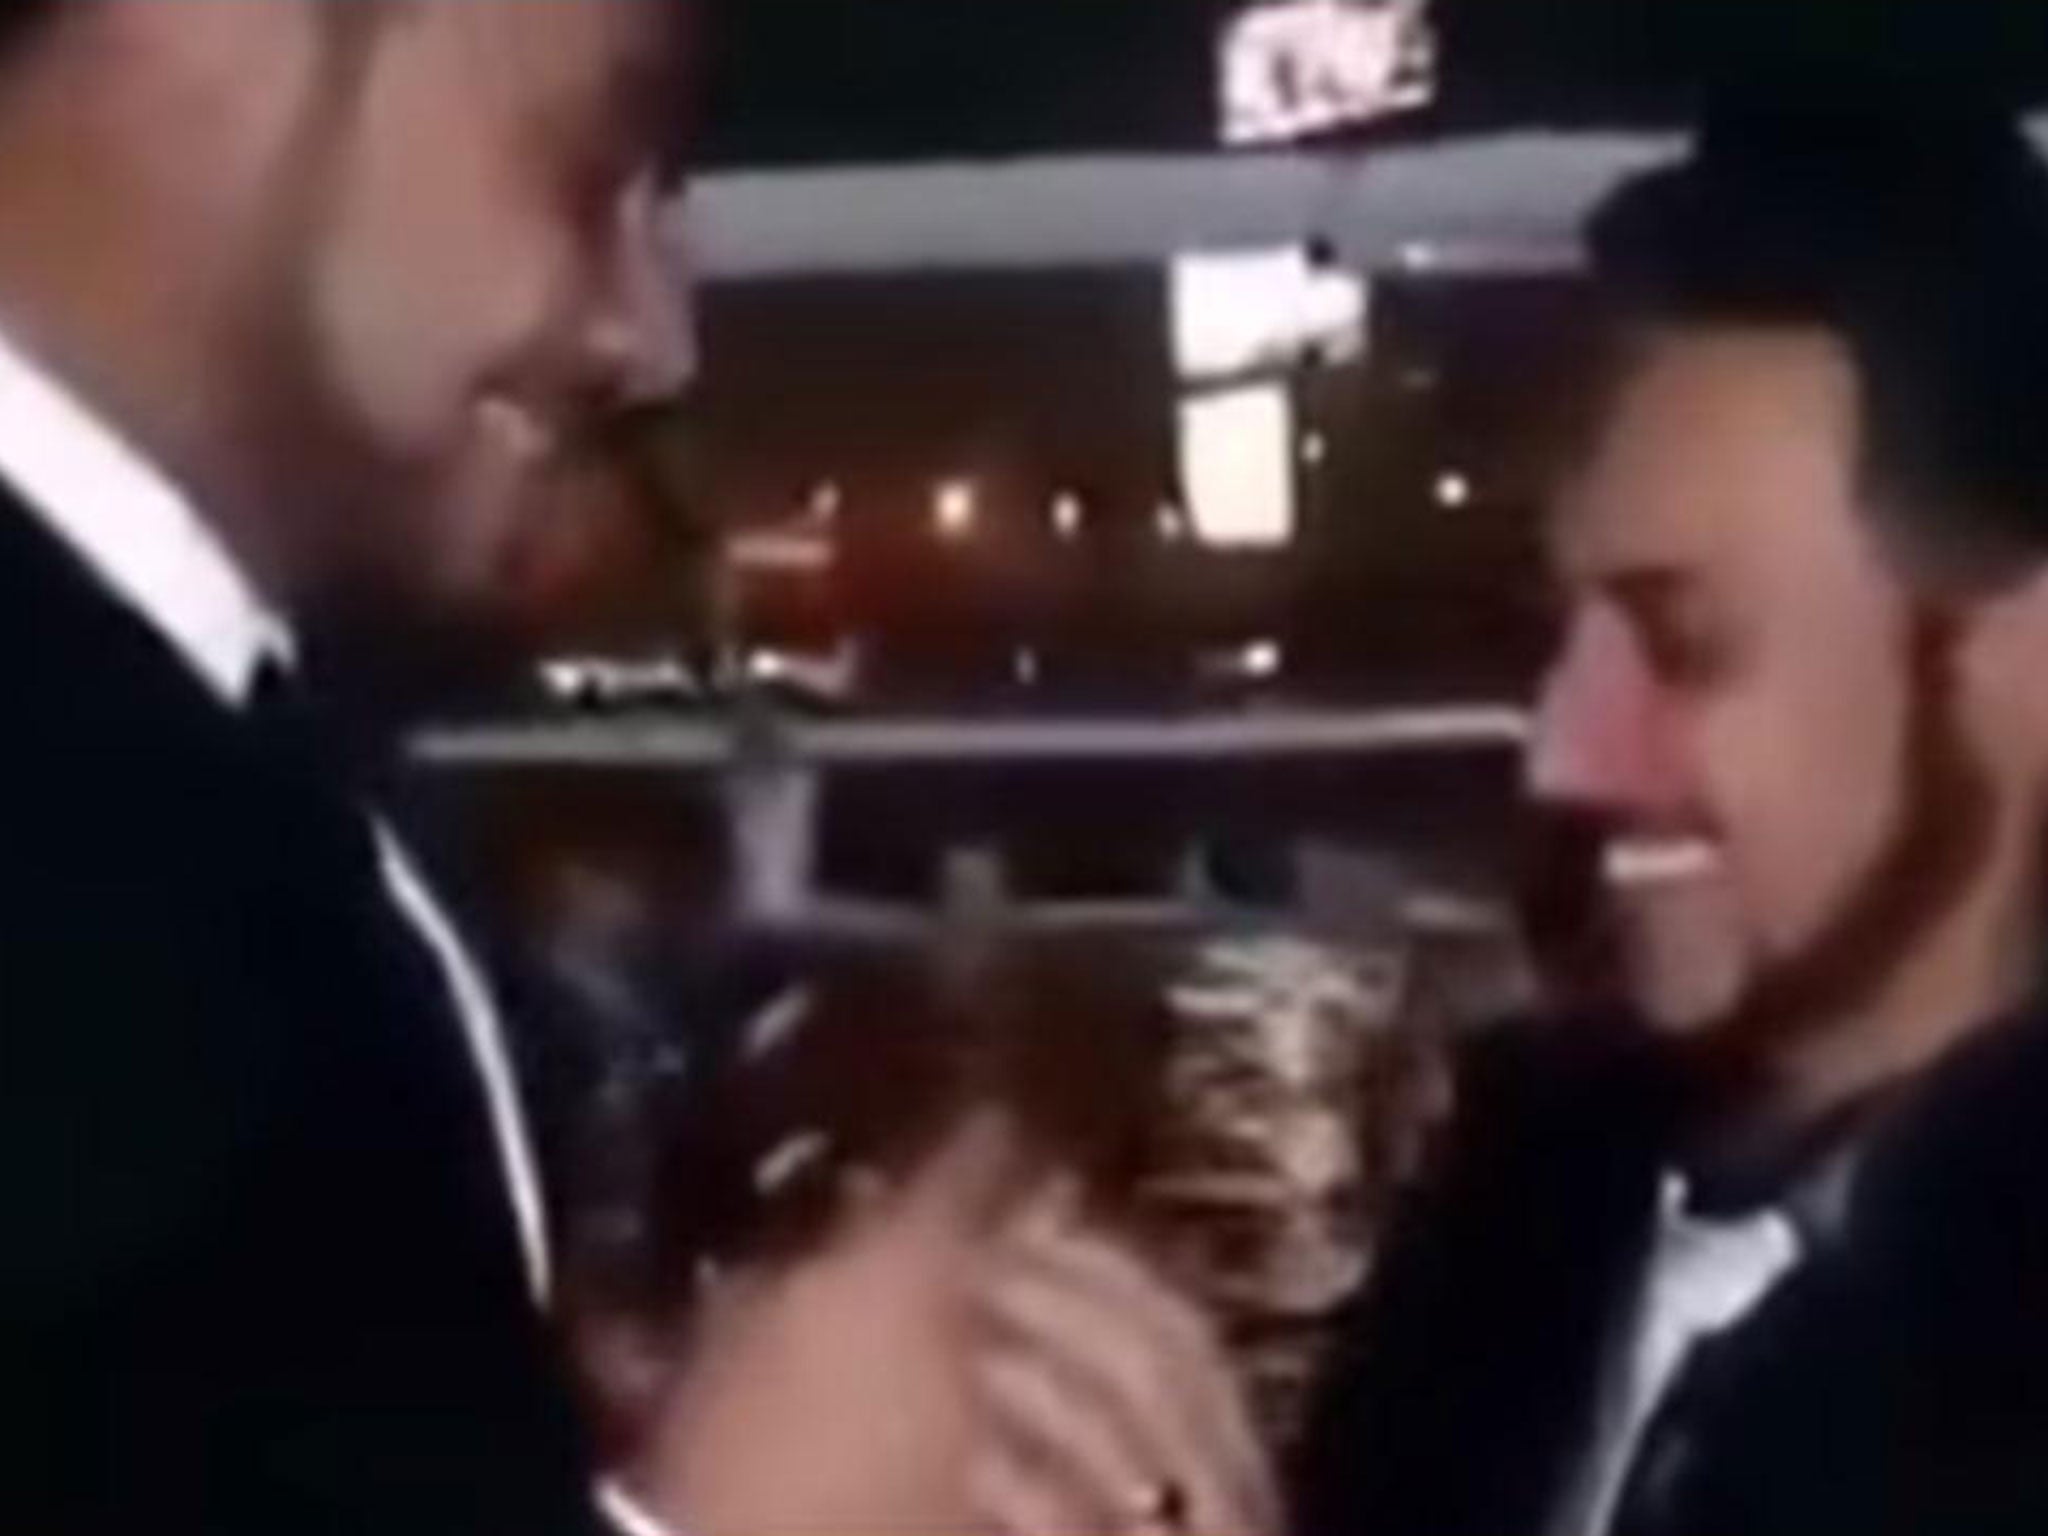 A still from the video allegedly showing a gay marriage